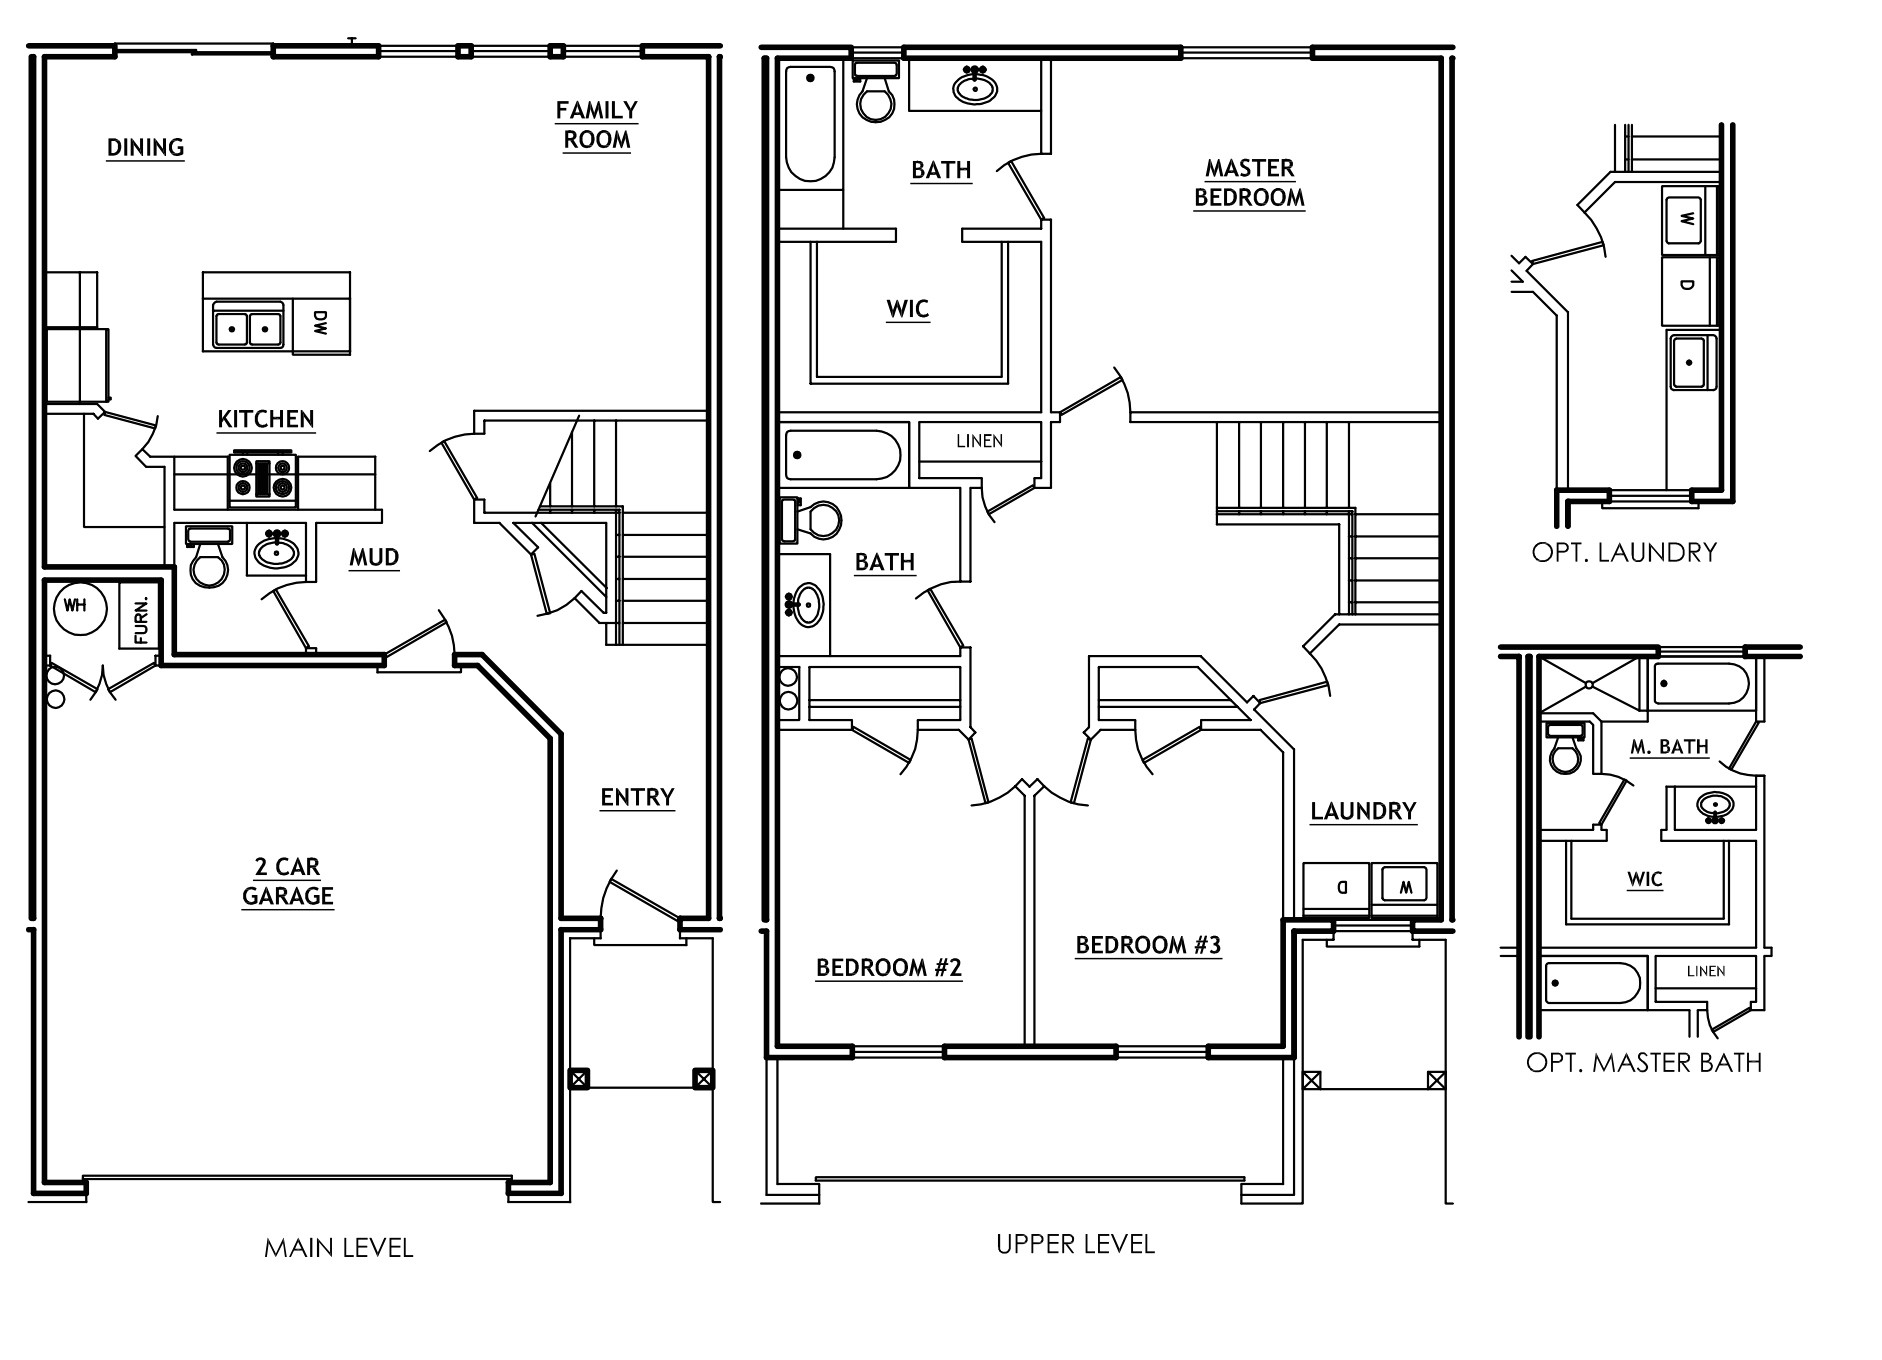 Parkview Homes Floor Plans Parkview Homes Floor Plans New the Hamilton In Chandon